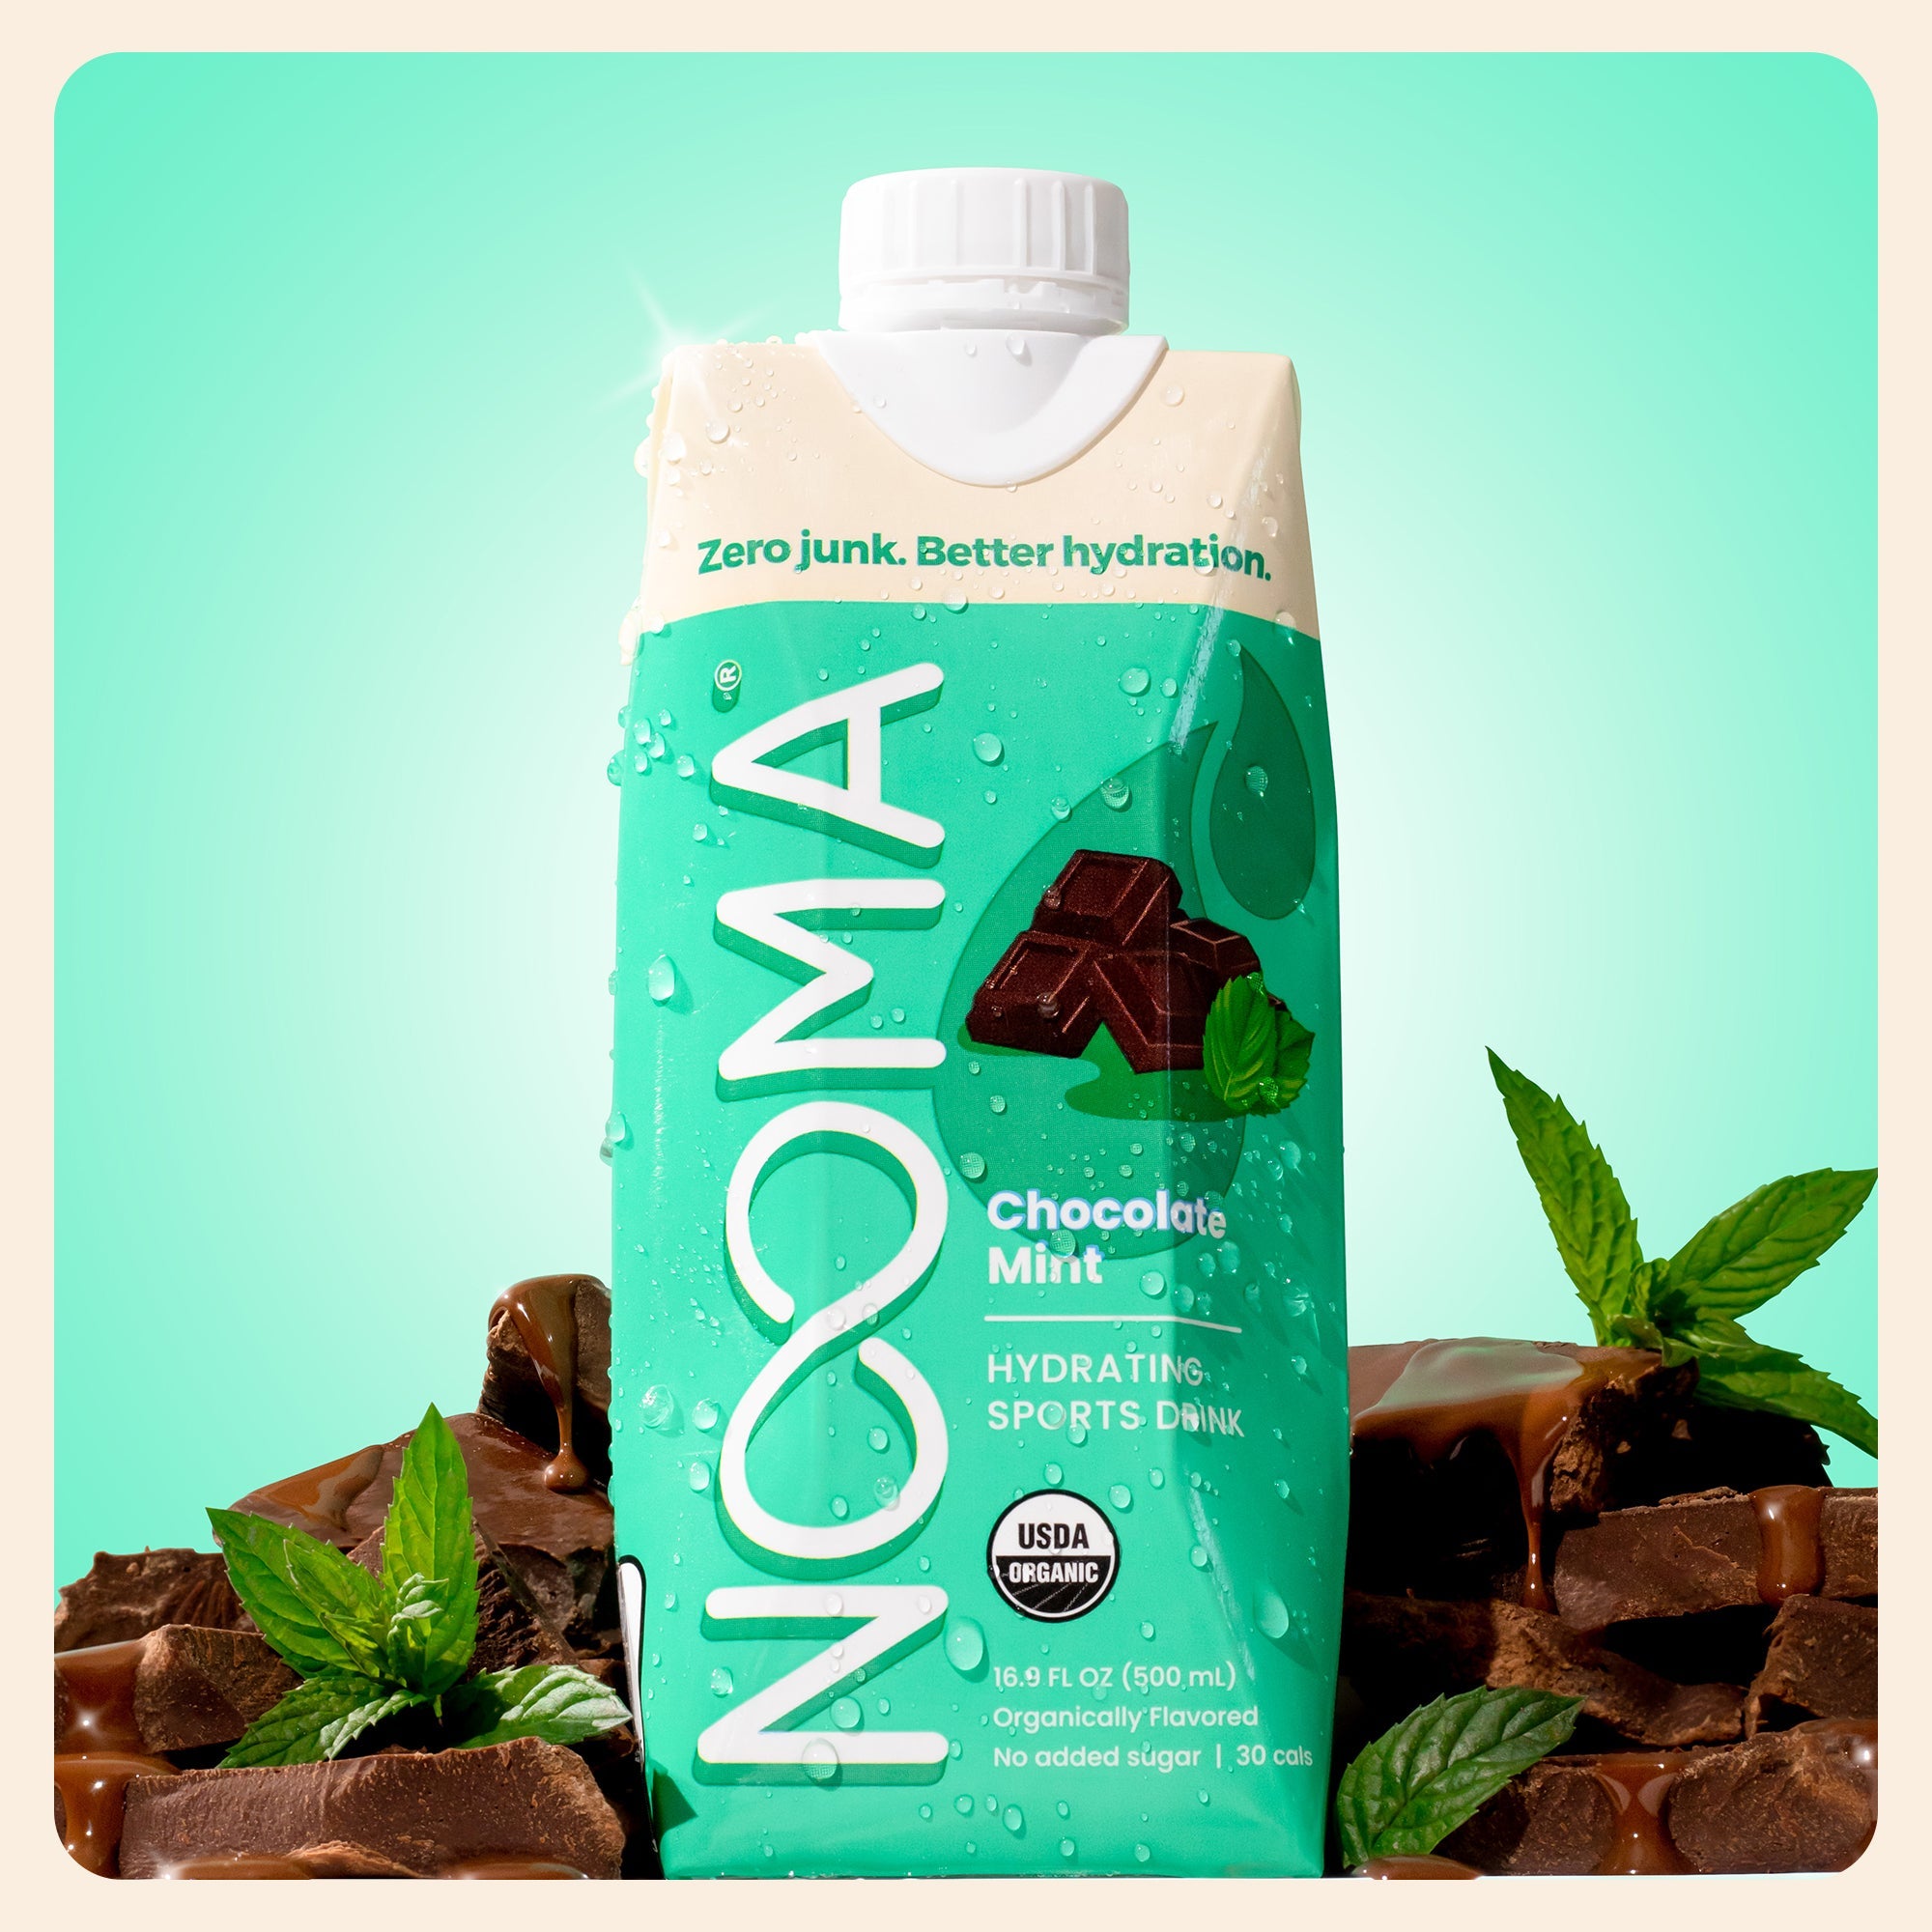 Nooma Hydration Chocolate Mint